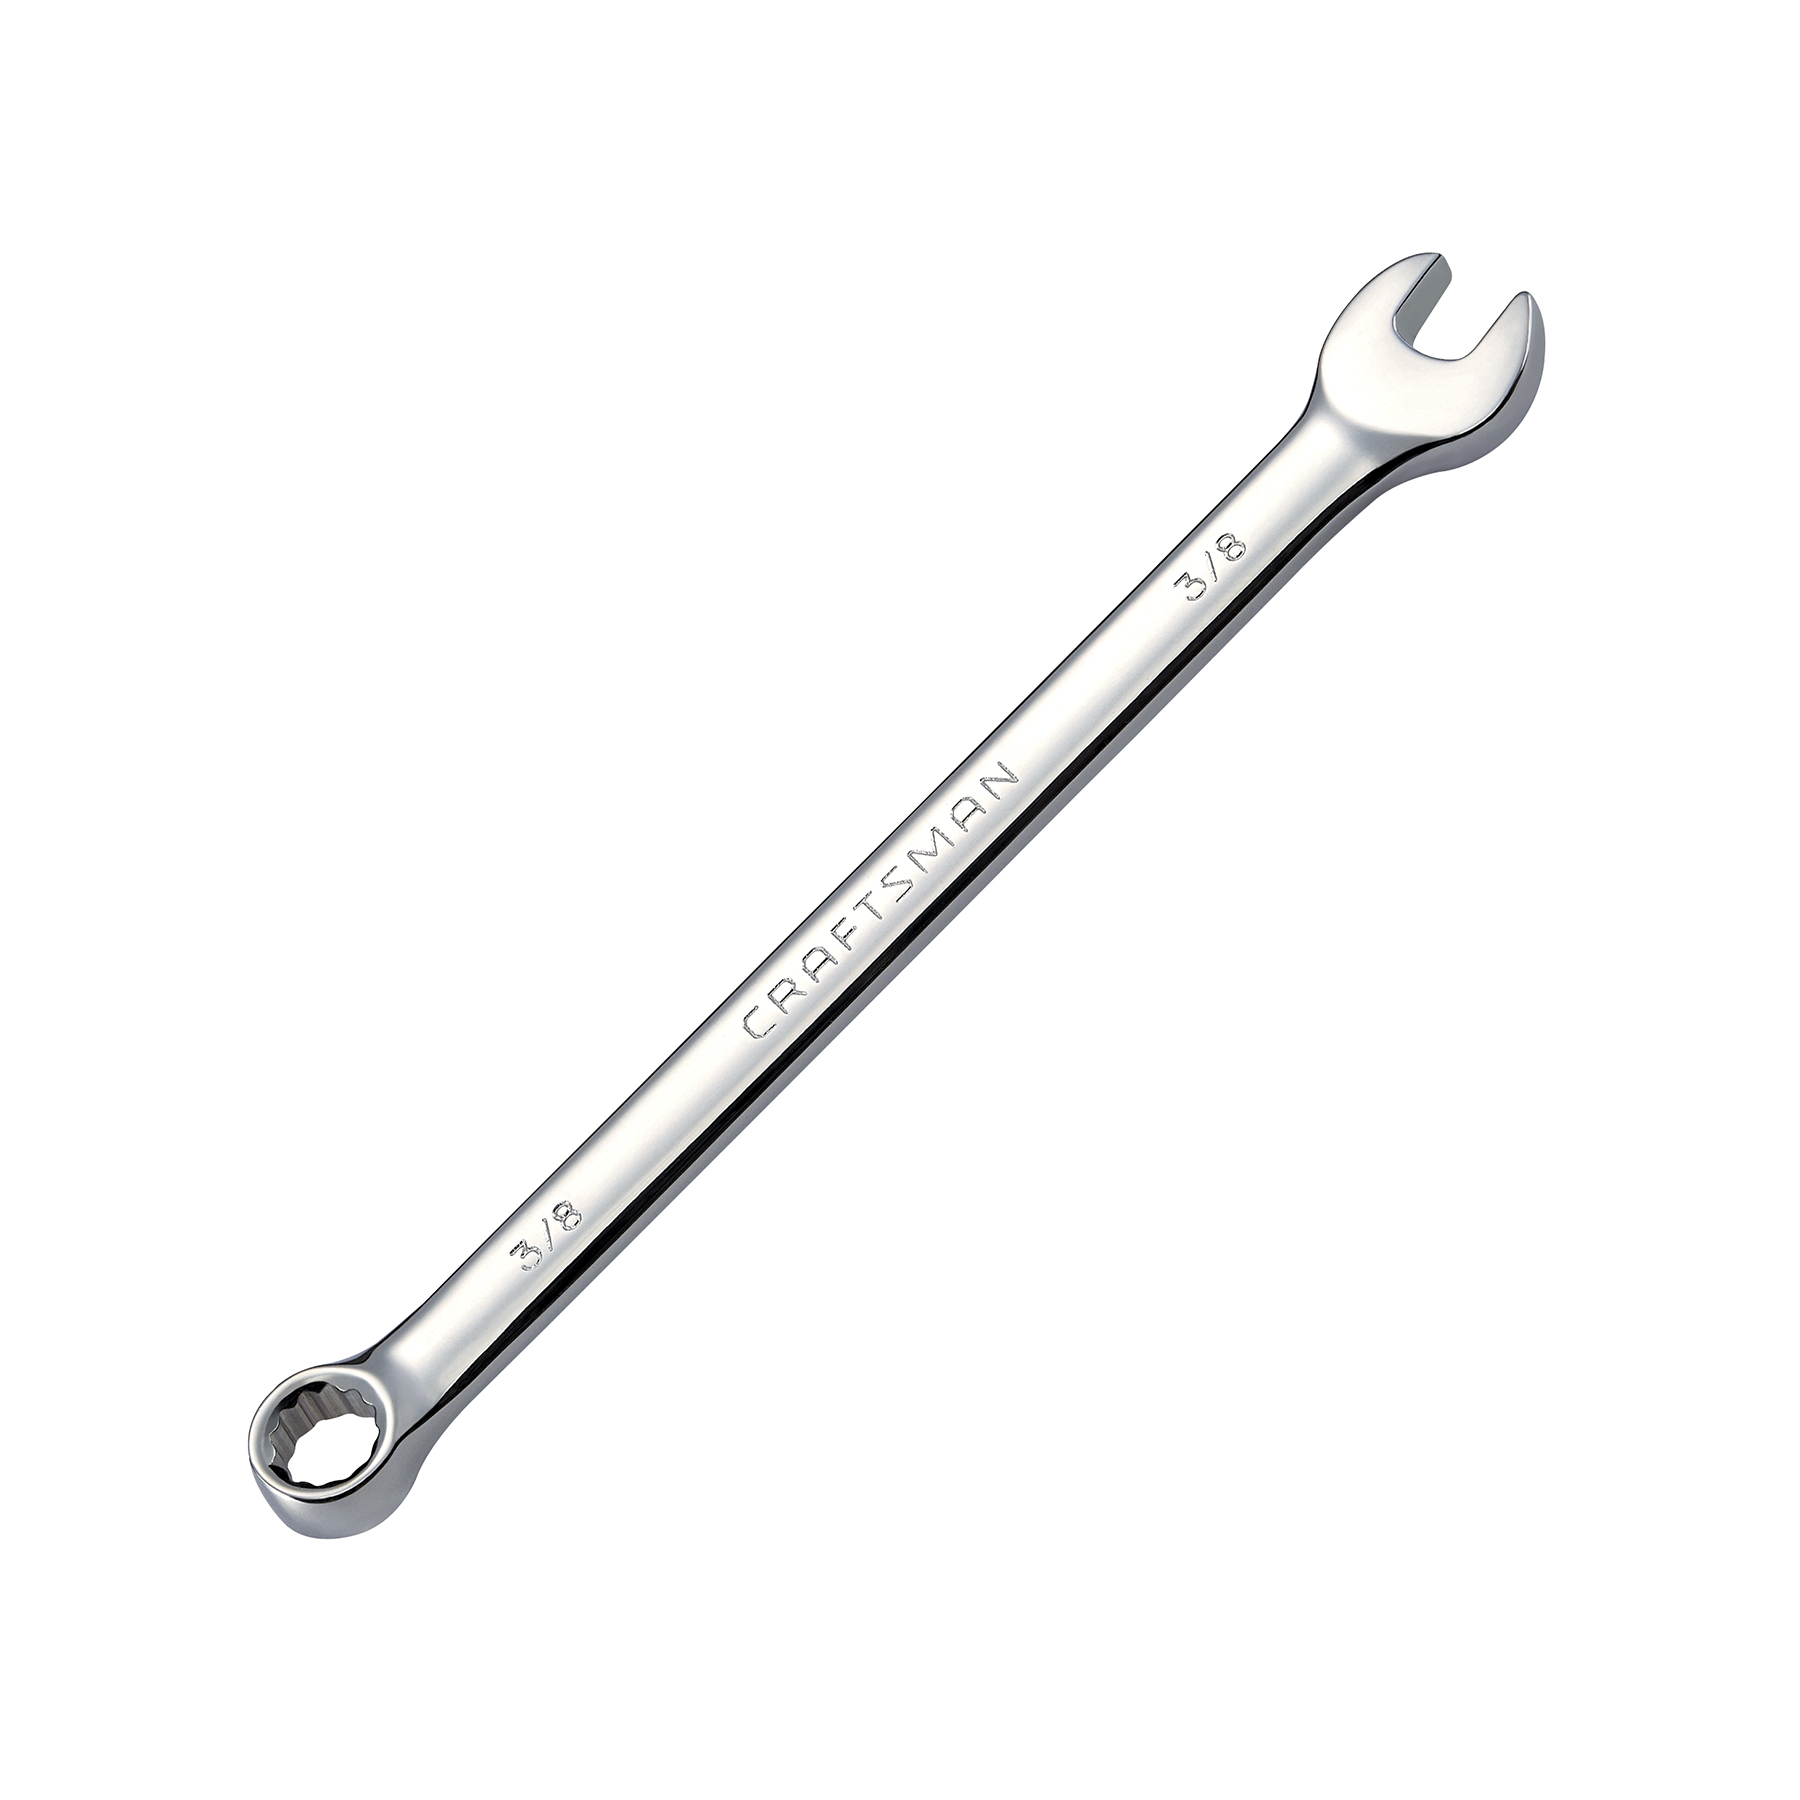 Craftsman Full Polish 12 Point SAE Long Pattern Standard Combination Wrench Inch 45983 7/8 